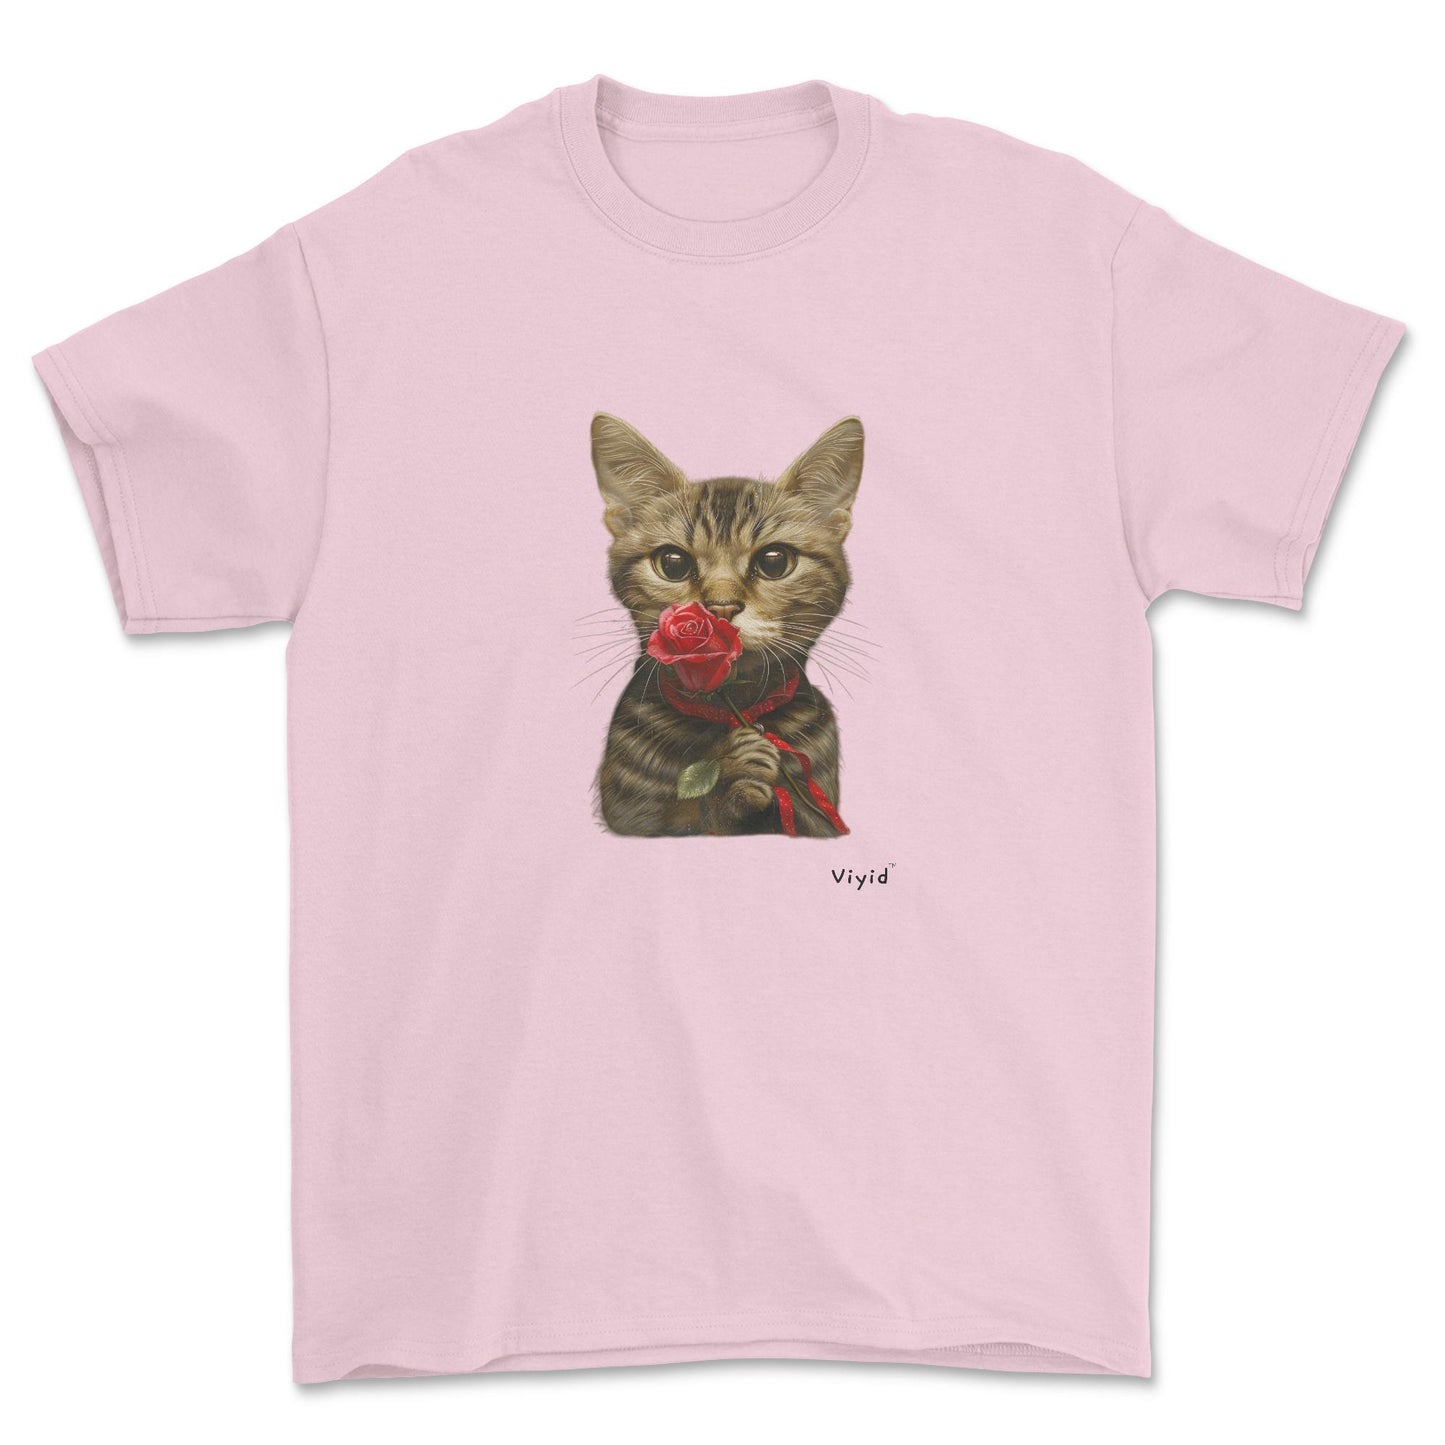 sniffing rose domestic shorthair cat youth t-shirt light pink